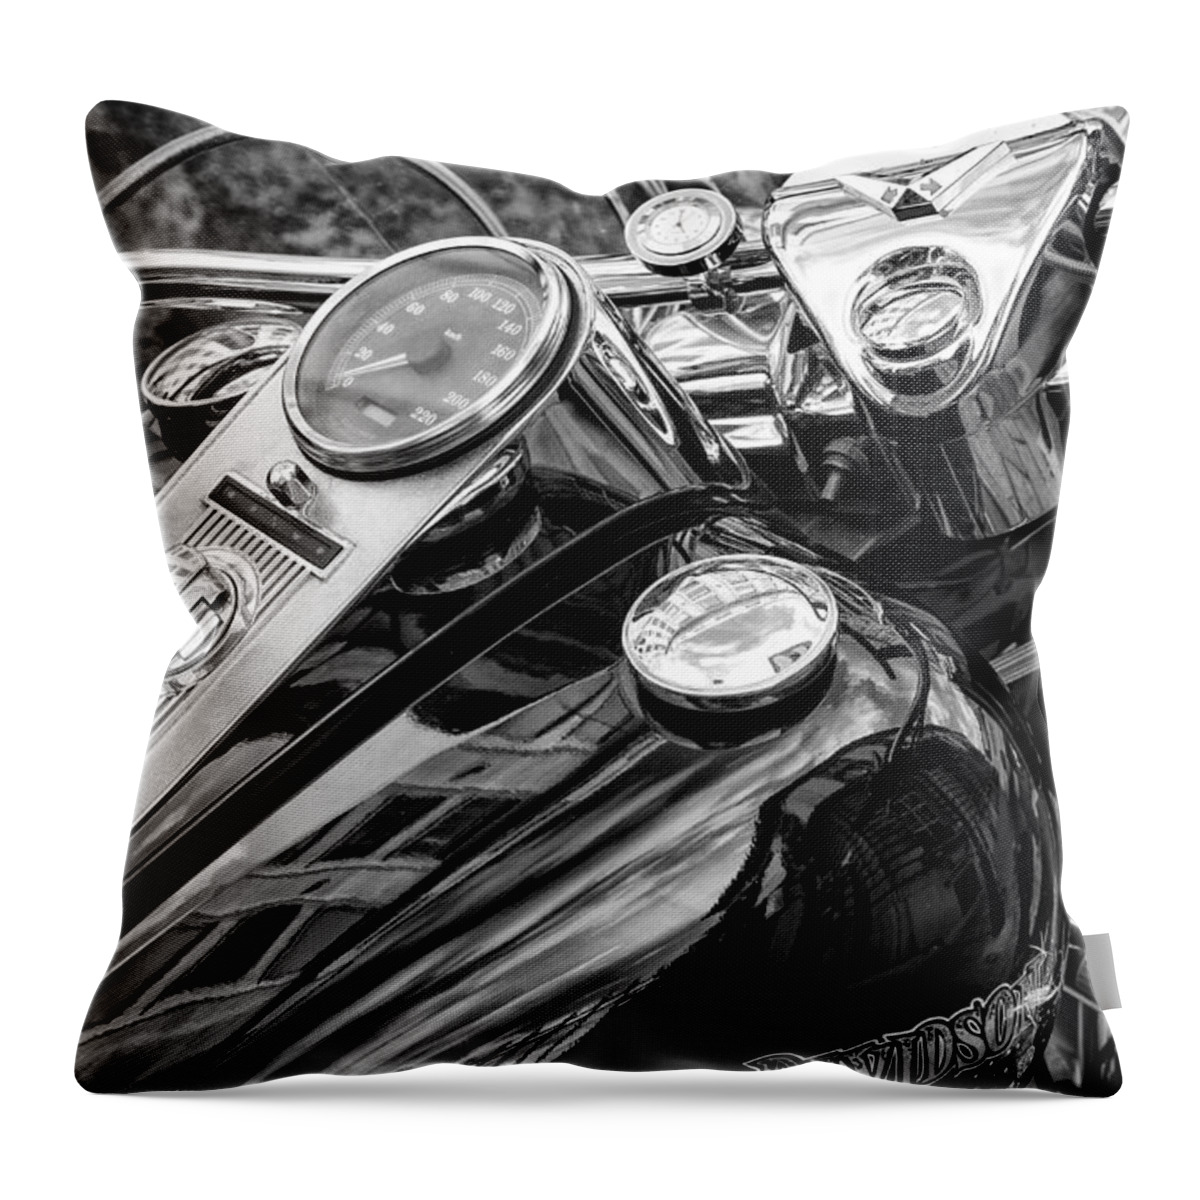 Spirit Throw Pillow featuring the photograph Loyal Friend by Pablo Lopez